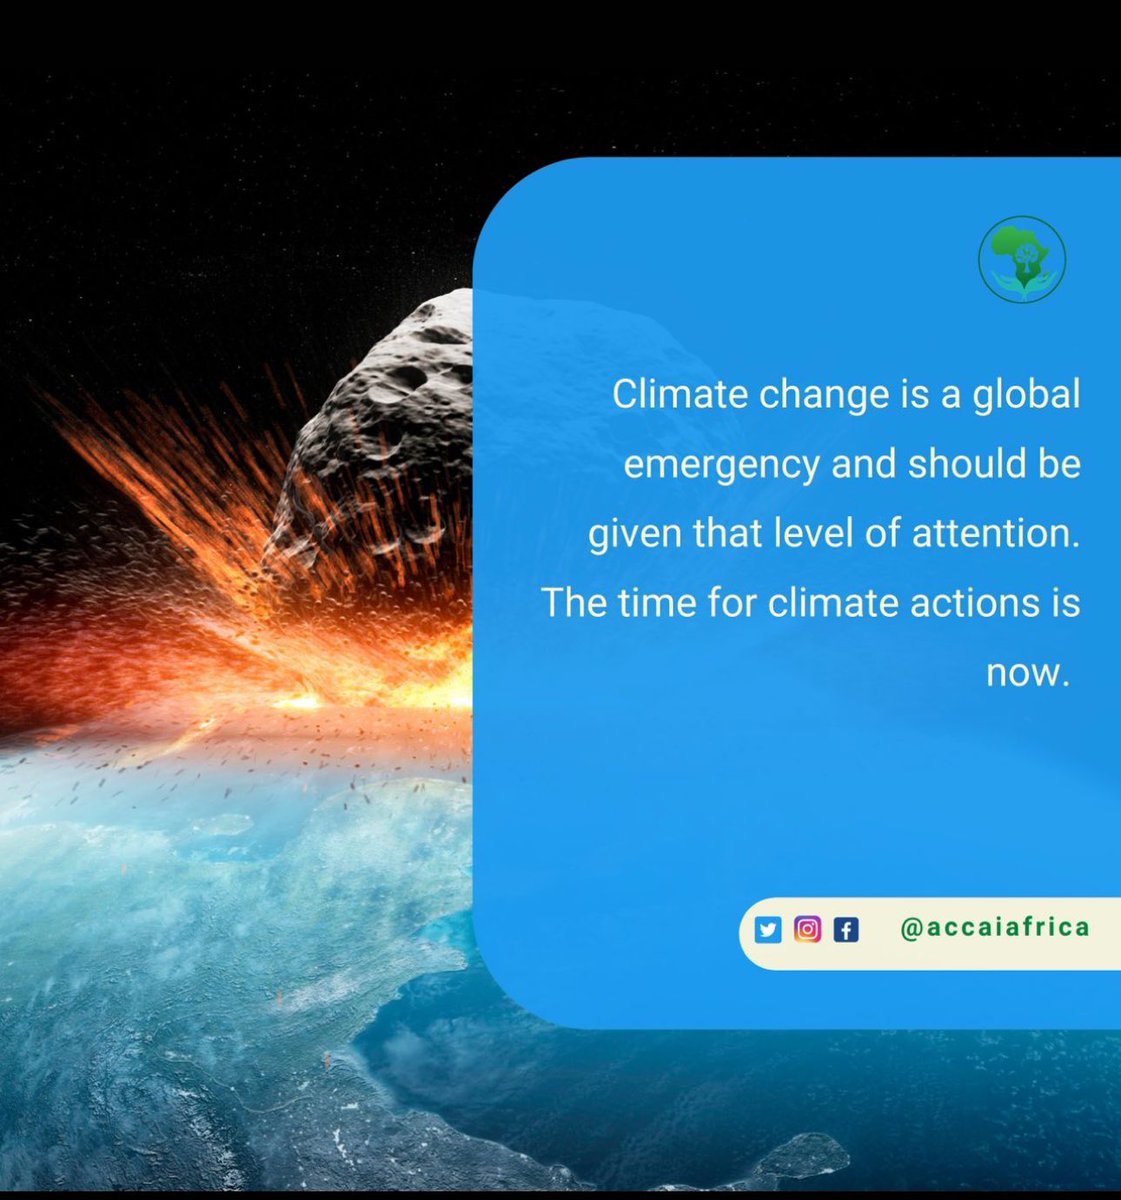 Rising temperatures and extreme weather events threaten our planet's future. It's time for collective action to reduce carbon emissions, promote renewable energy, and protect biodiversity. Let's act now to create a sustainable future for generations to come. #ClimateAction